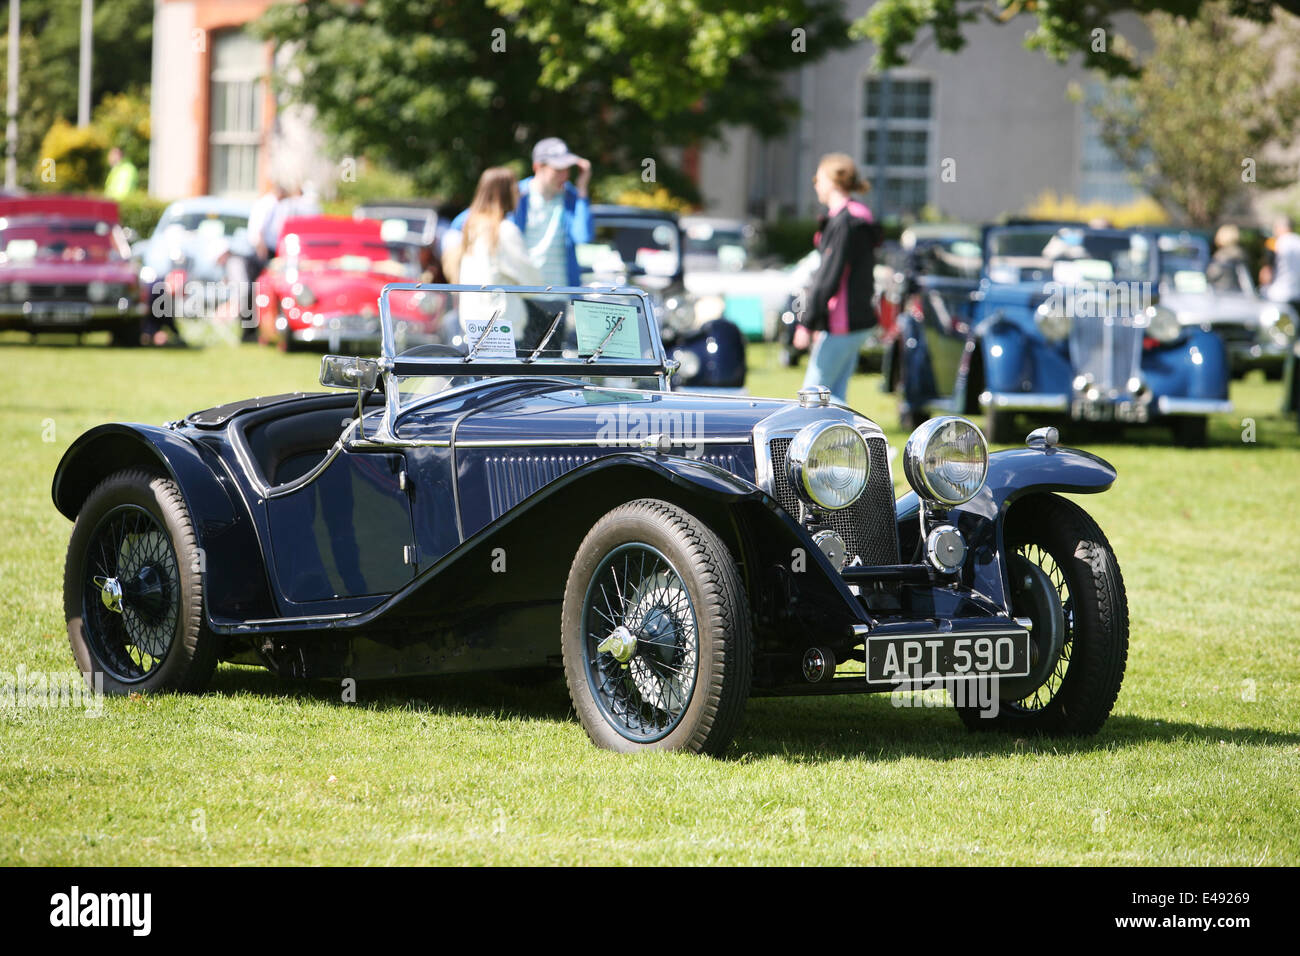 Dublin, Ireland. 6th July, 2014. Terenure Classic and Vintage car show Dublin 2014, featuring a strong turn out of Riley Cars from throughout the years. Terenure is one of Ireland's largest gathering of classic and vintage cars, with this being its 23rd year running. Credit:  Ian Shipley/Alamy Live News Stock Photo